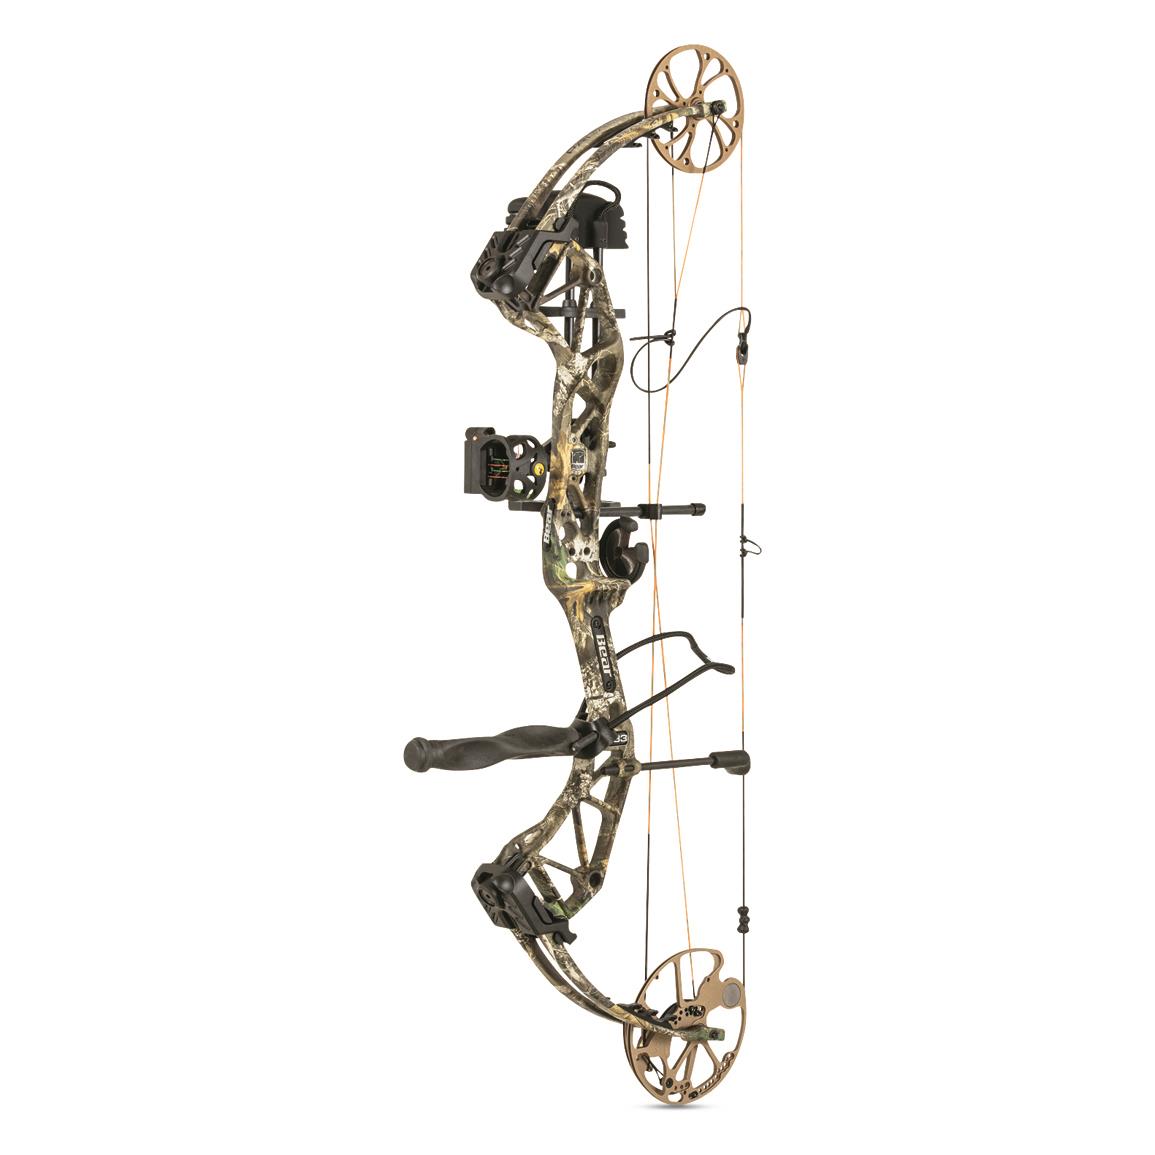 Bear Archery Paradox Ready-to-Hunt Compound Bow Package, Right Hand, 55-70 lbs. - $429.99 after code "ULTIMATE20"